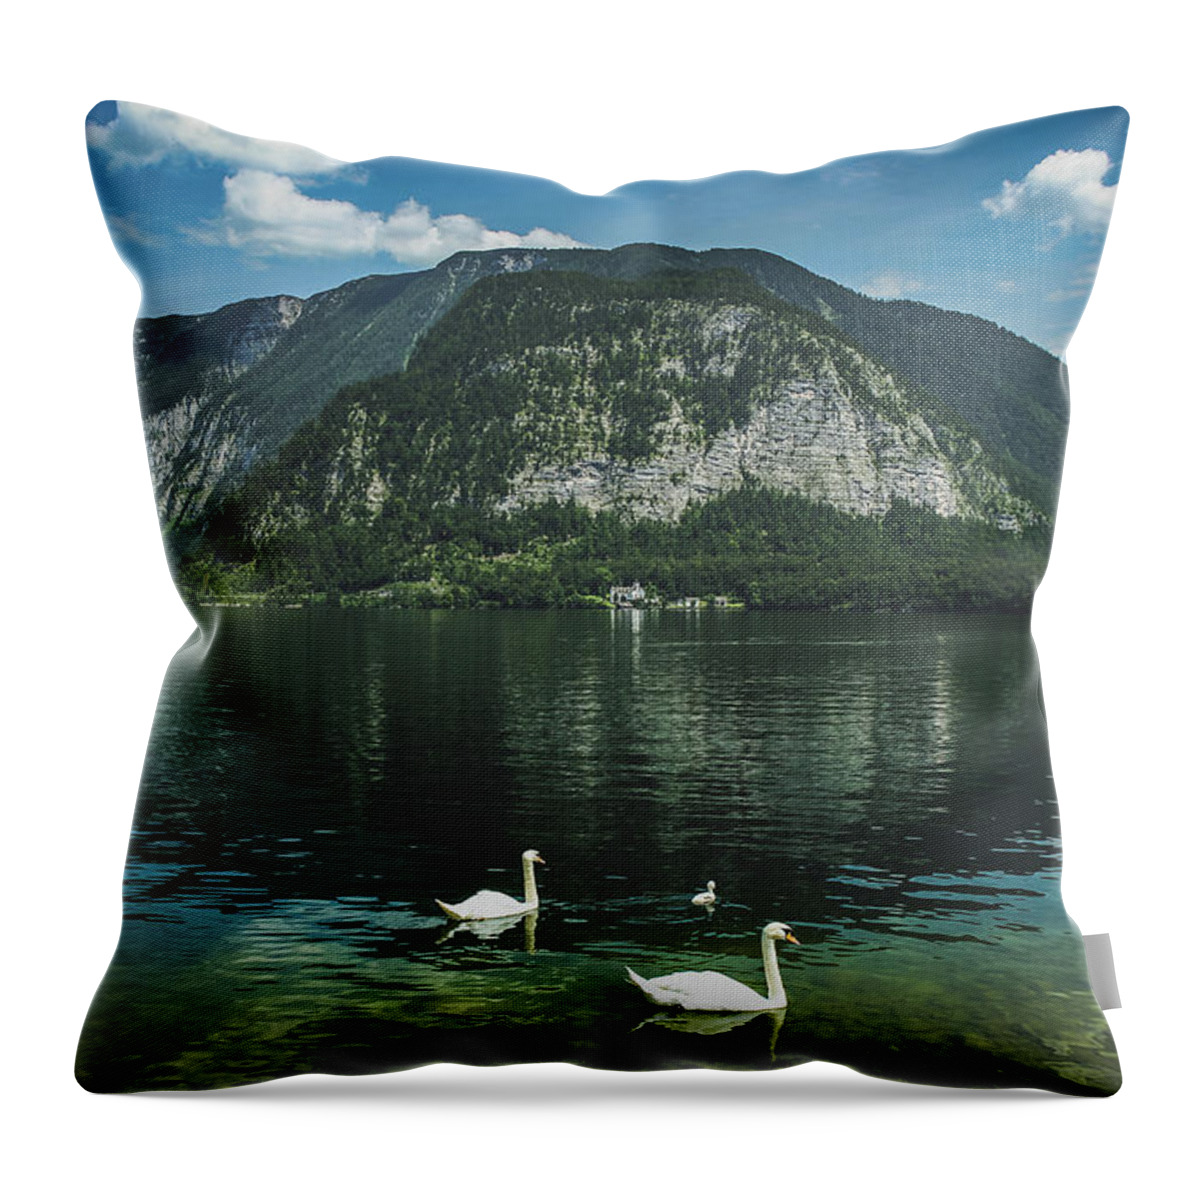 Animal Throw Pillow featuring the photograph Three Lake Hallstatt Swans by Andy Konieczny